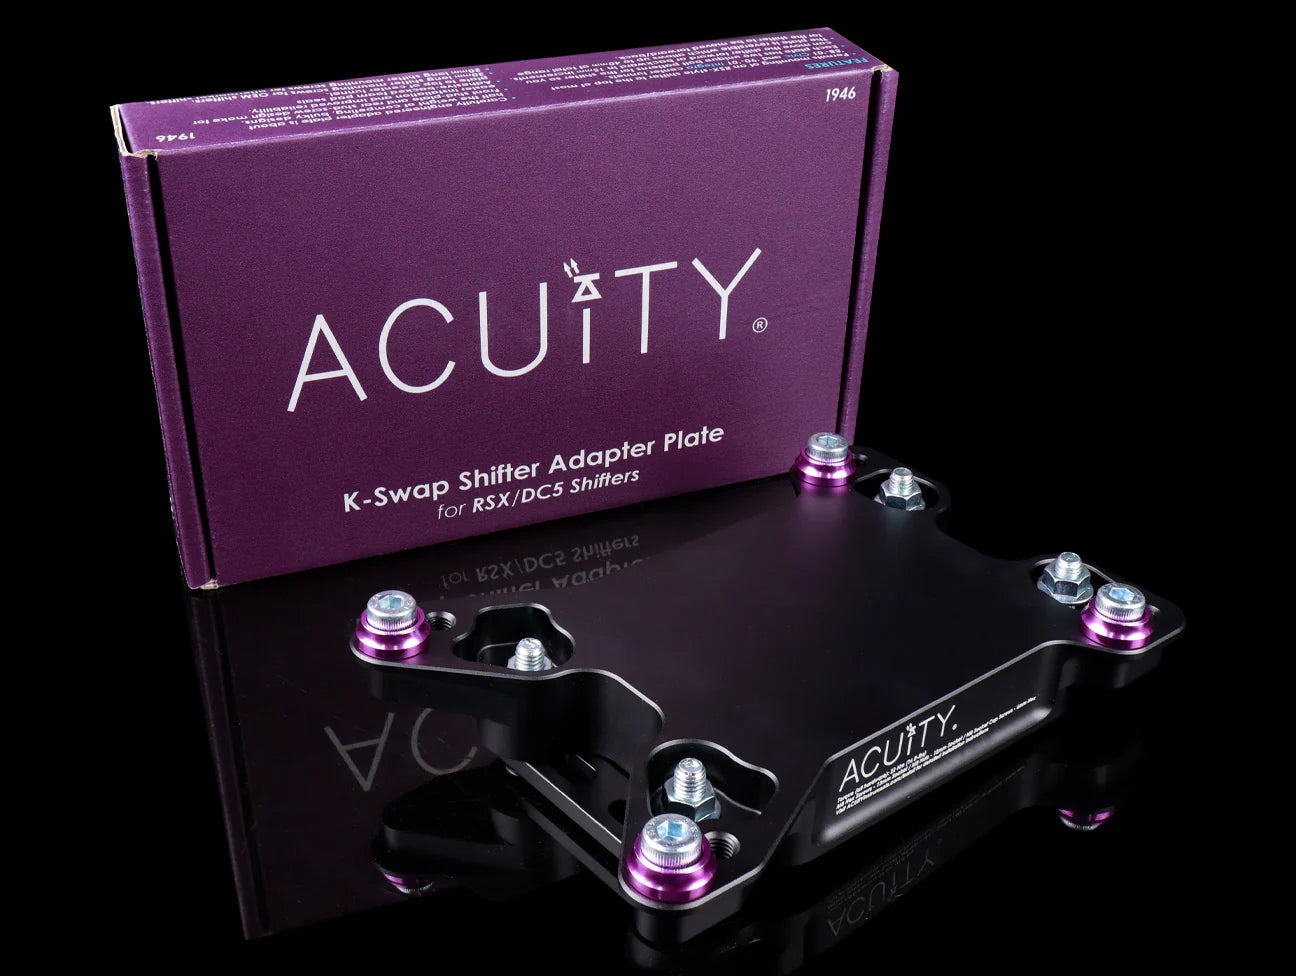 ACUITY K-SWAP SHIFTER ADAPTER PLATE FOR RSX SHIFTERS